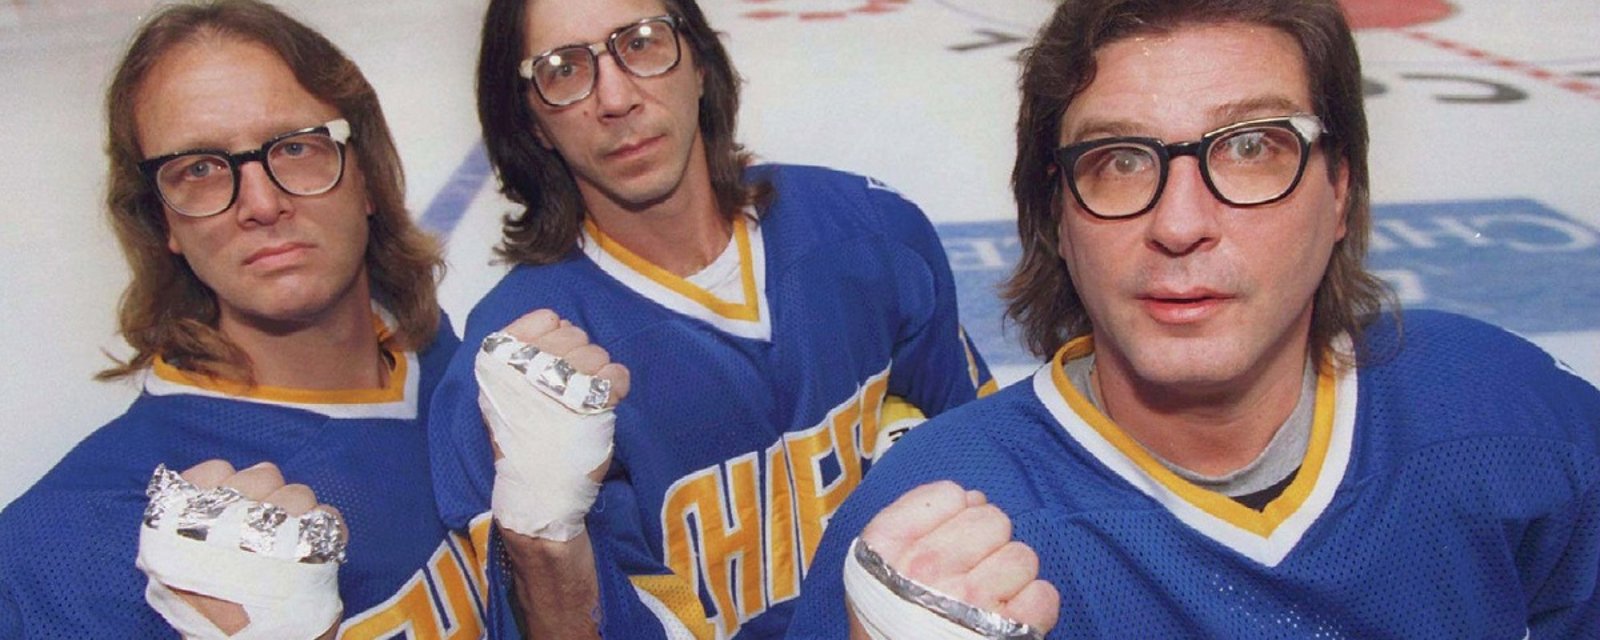 Update: Iconic 'Hanson Brother' battling stage 4 cancer.